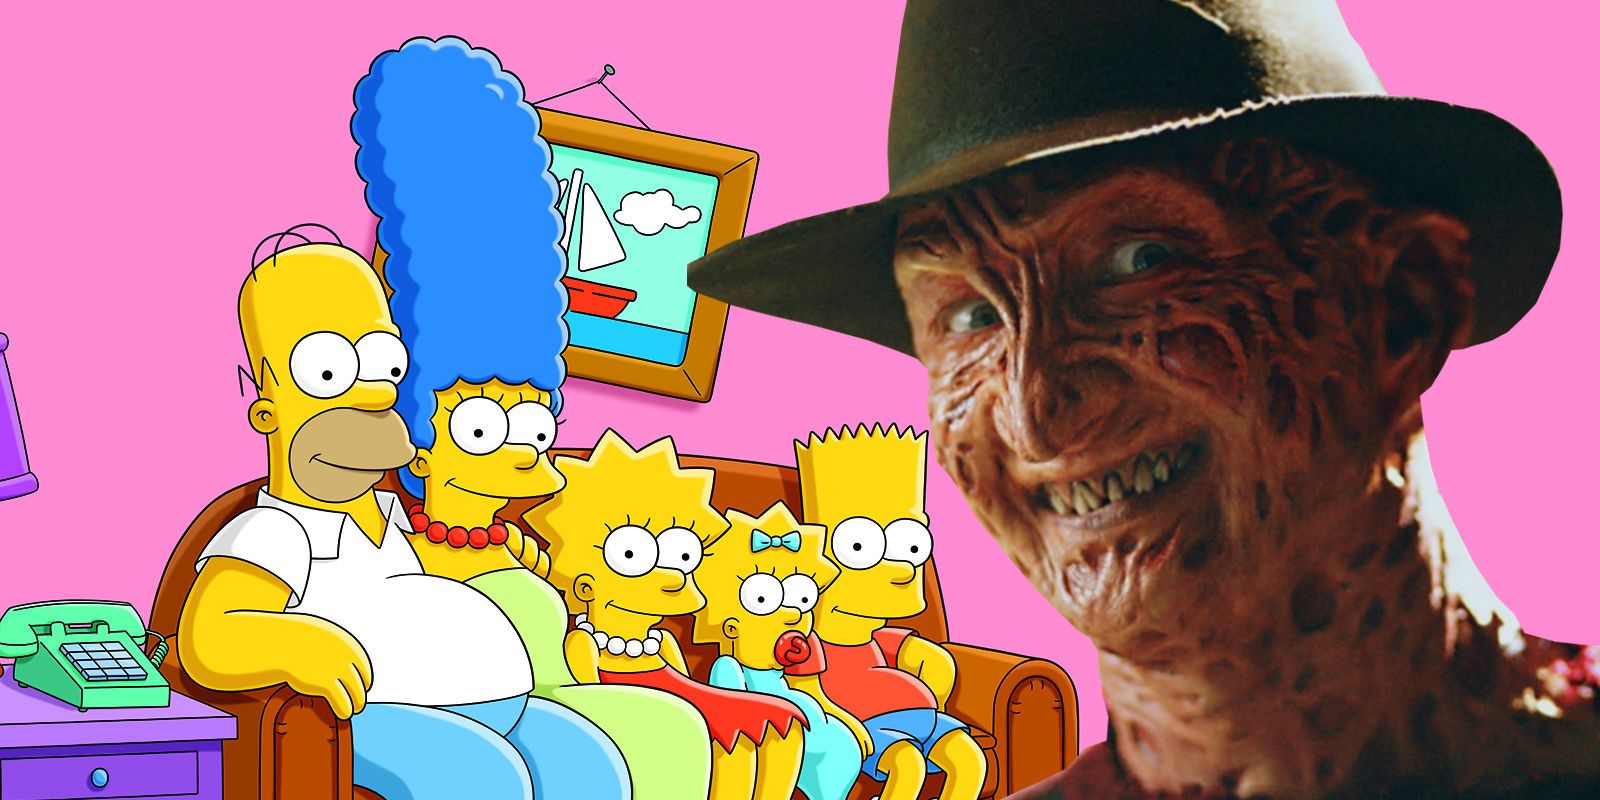 Every Freddy Krueger Appearance on The Simpsons